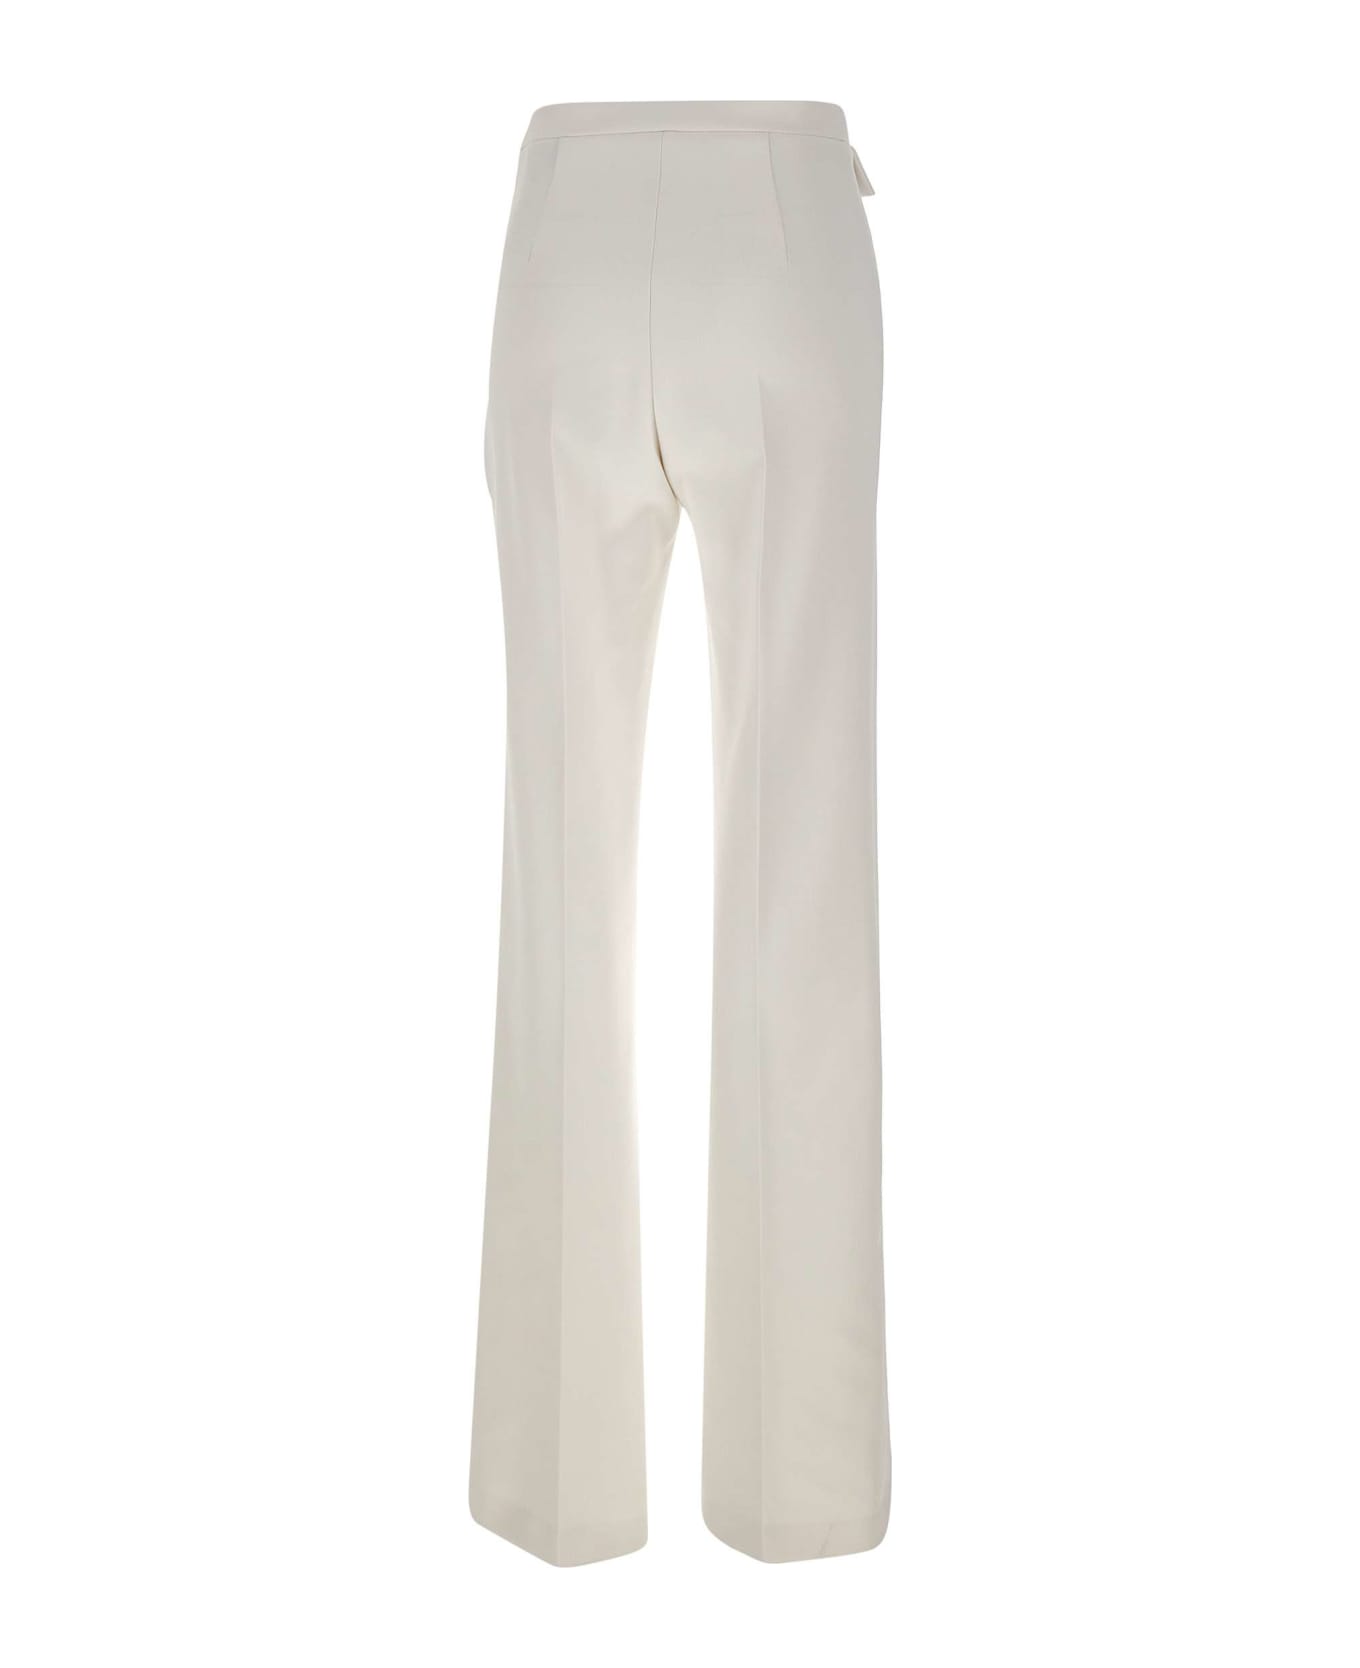 Elisabetta Franchi 'daily' Double Stretch Cr?pe Trousers - WHITE